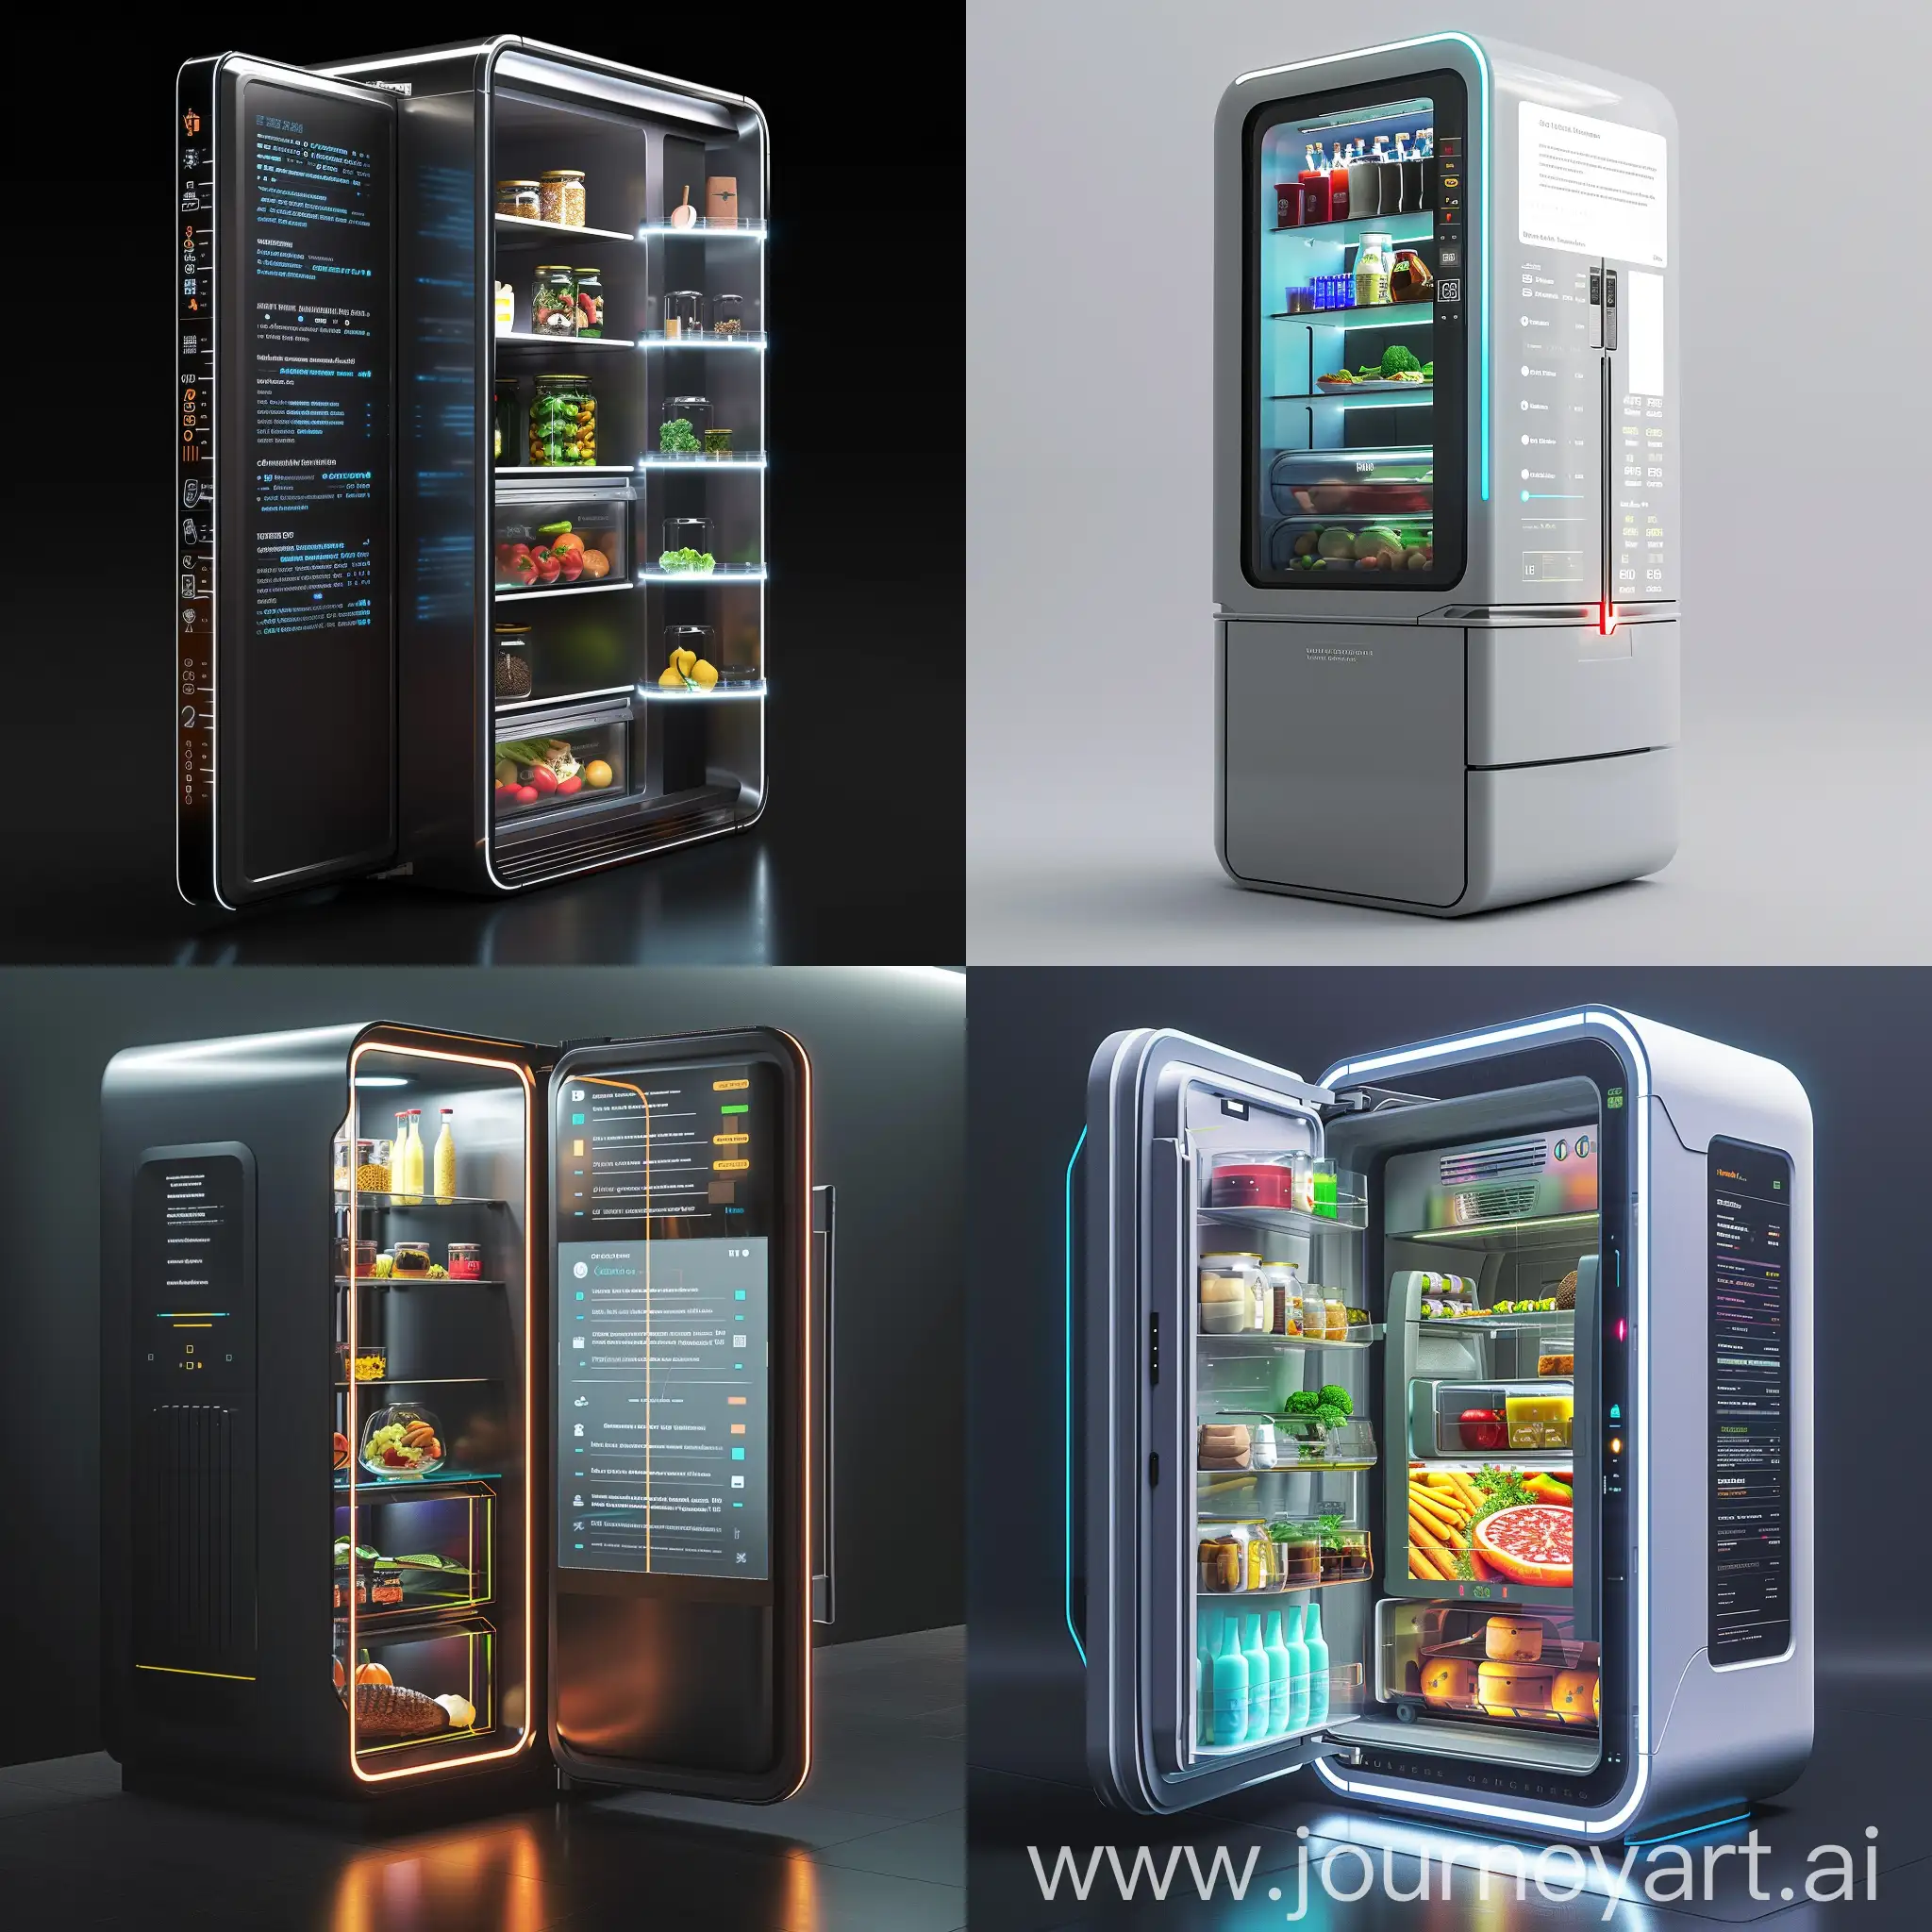 Futuristic-Fridge-AIPowered-Food-Management-System-with-Holographic-Display